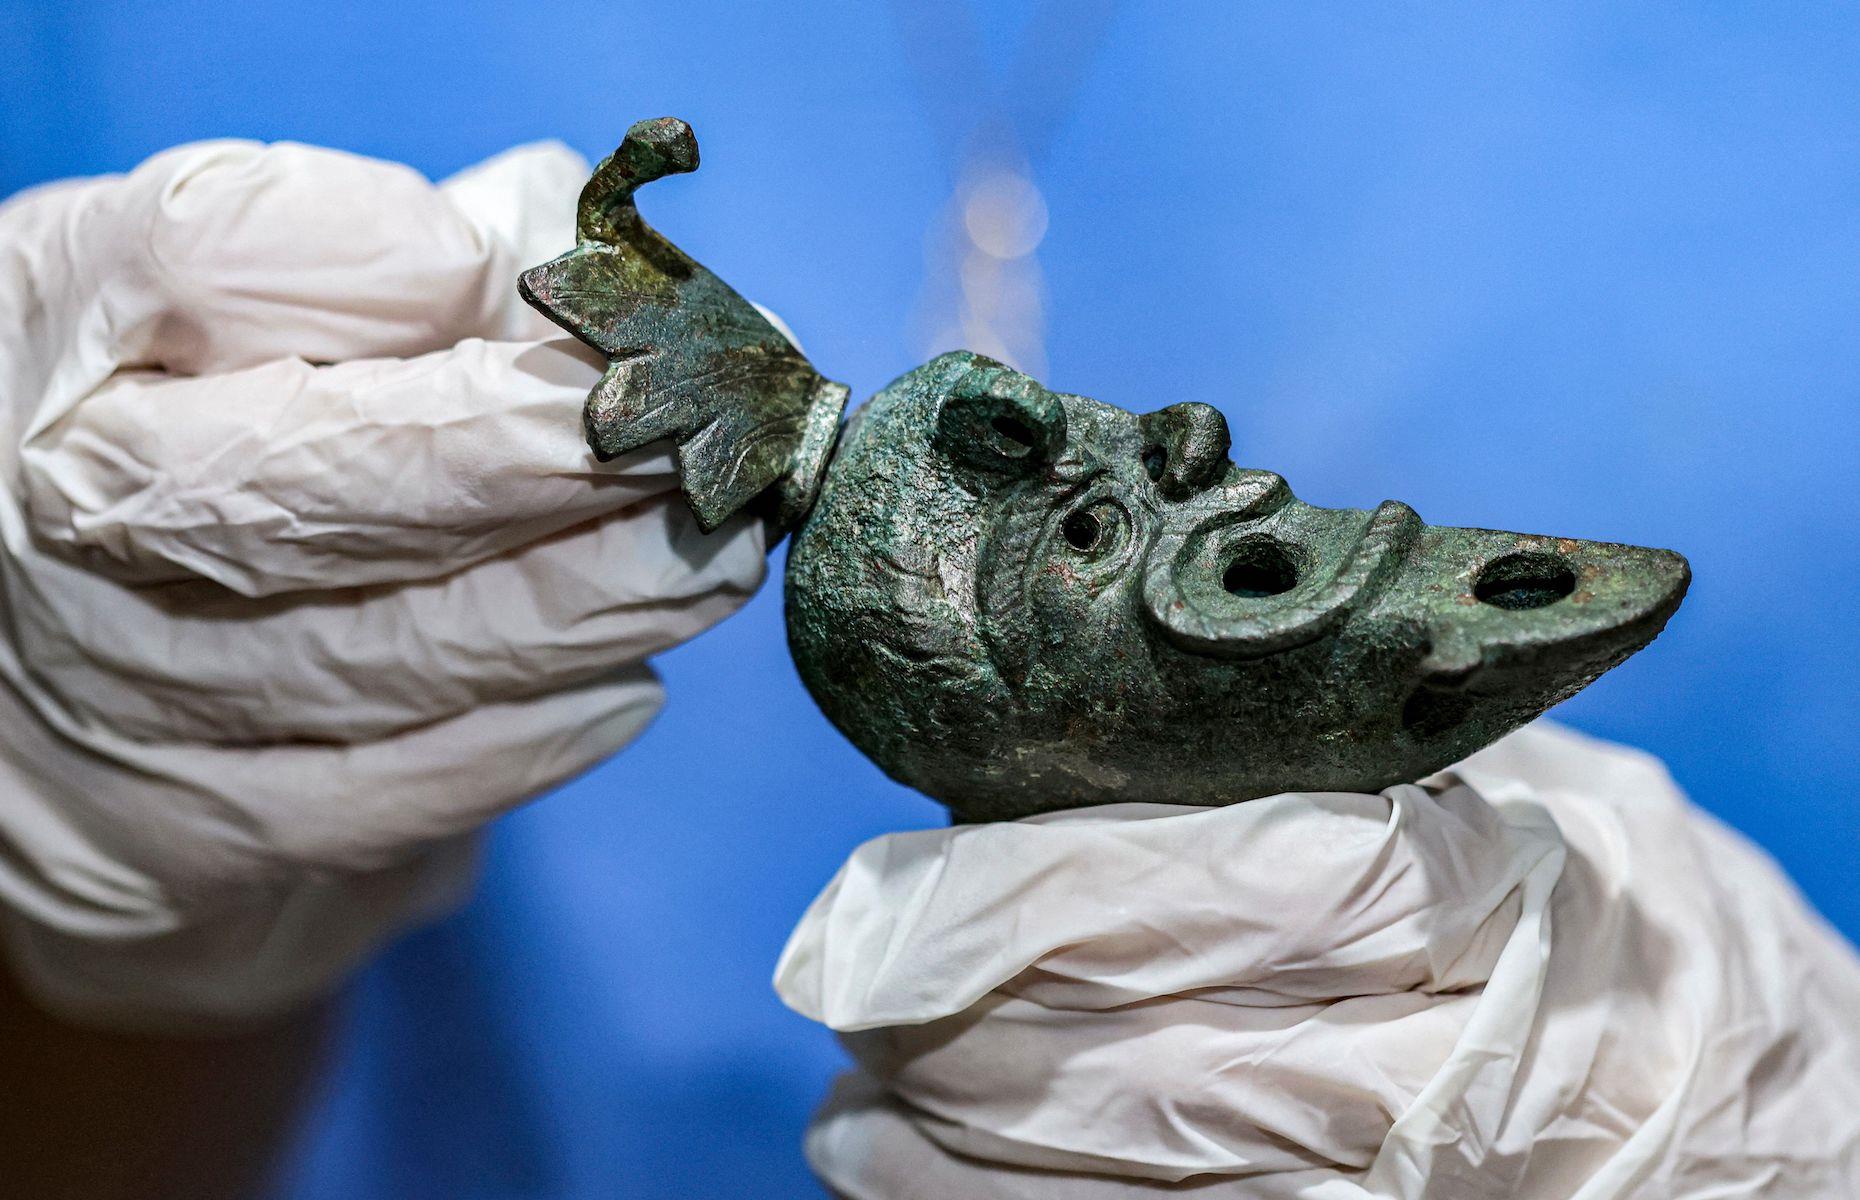 <p>In May 2021, <a href="https://www.timesofisrael.com/rare-2000-year-old-oil-lamp-shaped-like-grotesque-face-found-in-city-of-david/">a rare and bizarre-looking bronze oil lamp was discovered</a> by Israeli archaeologists in the foundation of a building erected in Jerusalem’s City of David almost 2,000 years ago. The Israel Antiquities Authority said it believed the lamp, which is shaped like half a head of a bearded man, was deposited as an offering to bring good fortune to the building’s residents. It’s estimated to be from the late 1st century or early 2nd century. The lamp’s unusually well-preserved wick was also discovered at the excavation site. </p>